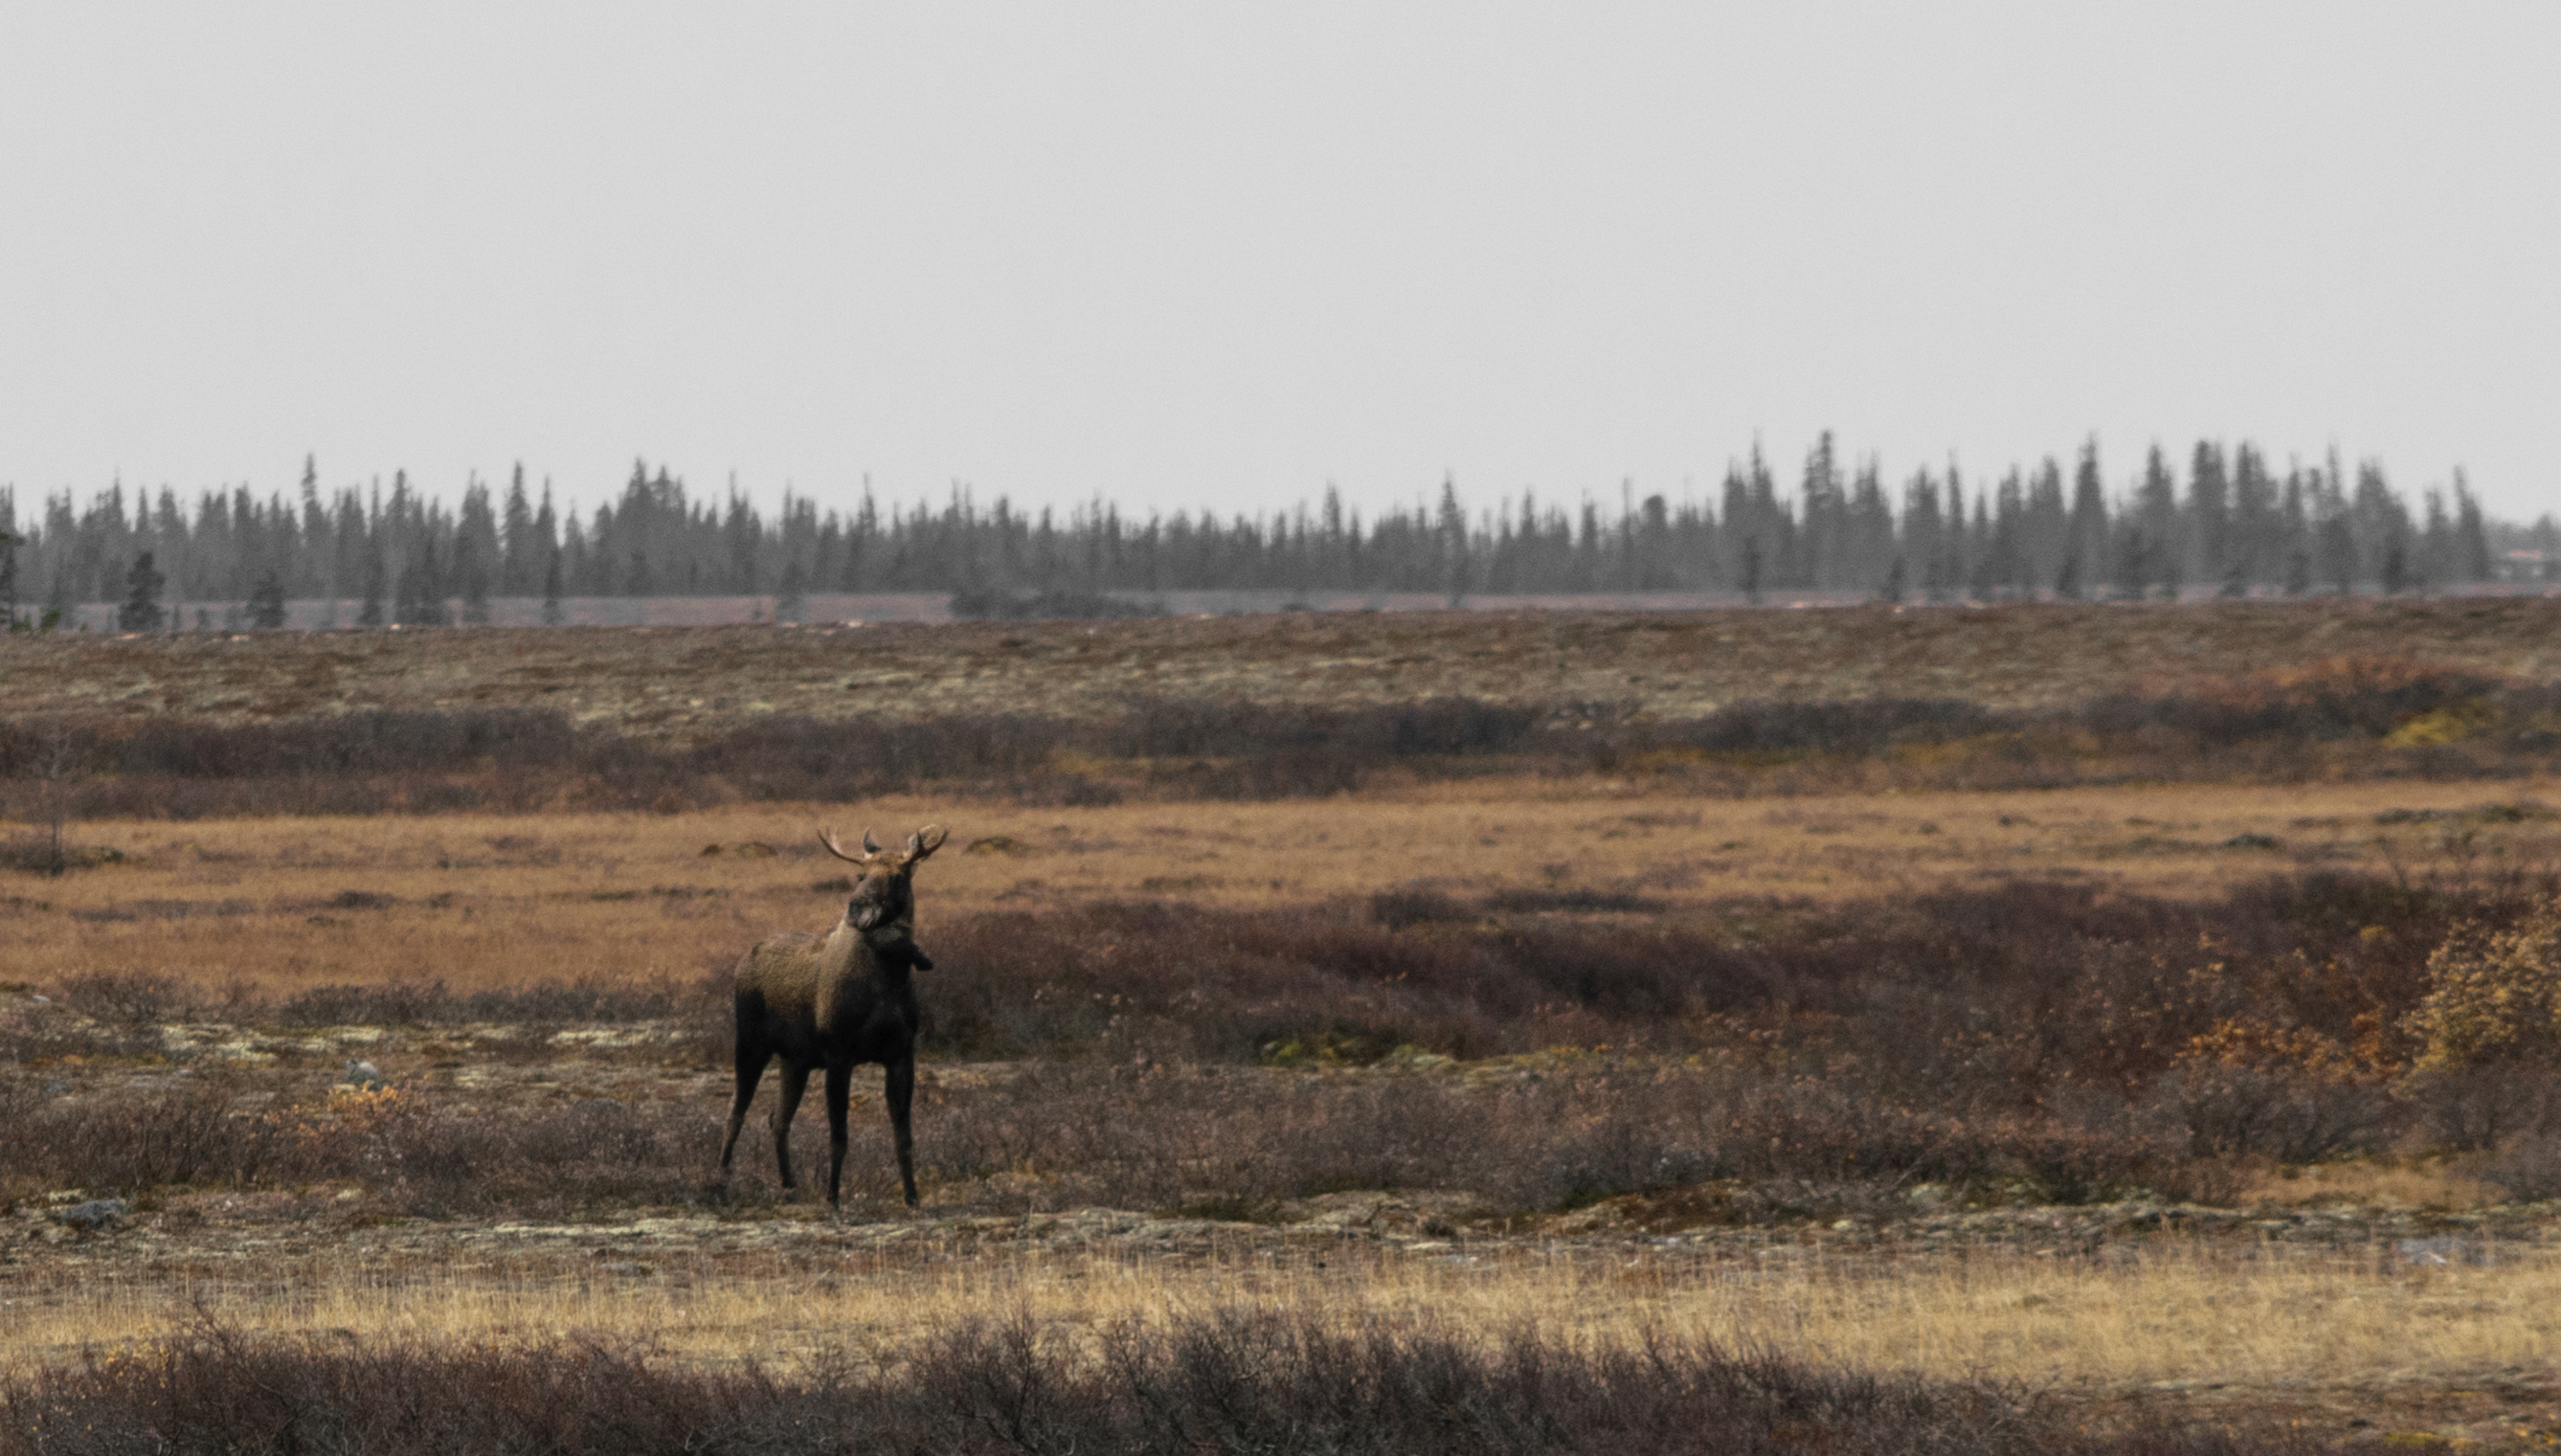 According to our Parks Canada guide, moose aren't common during this time of year. 